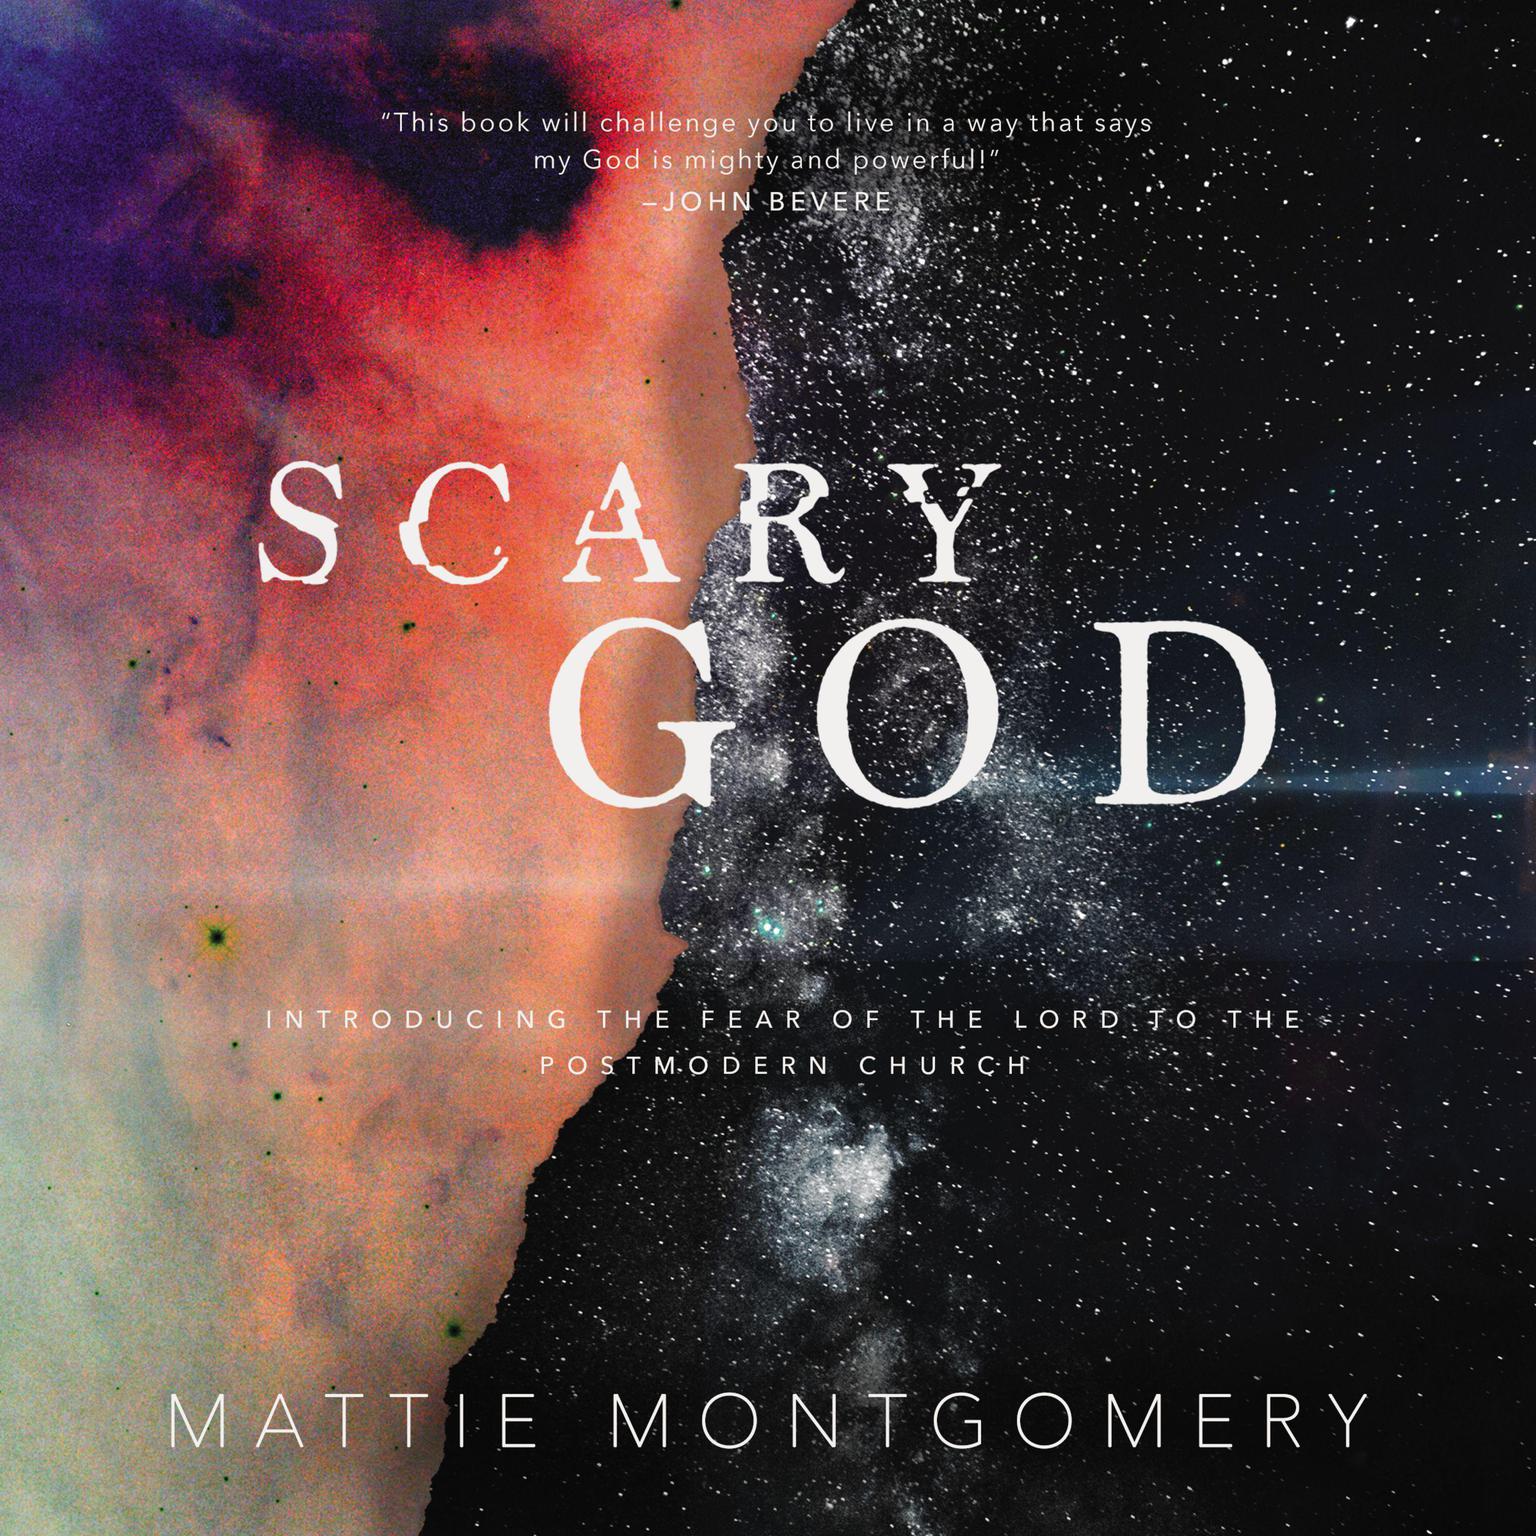 Scary God: Introducing The Fear of the Lord to the Postmodern Church Audiobook, by Mattie Montgomery